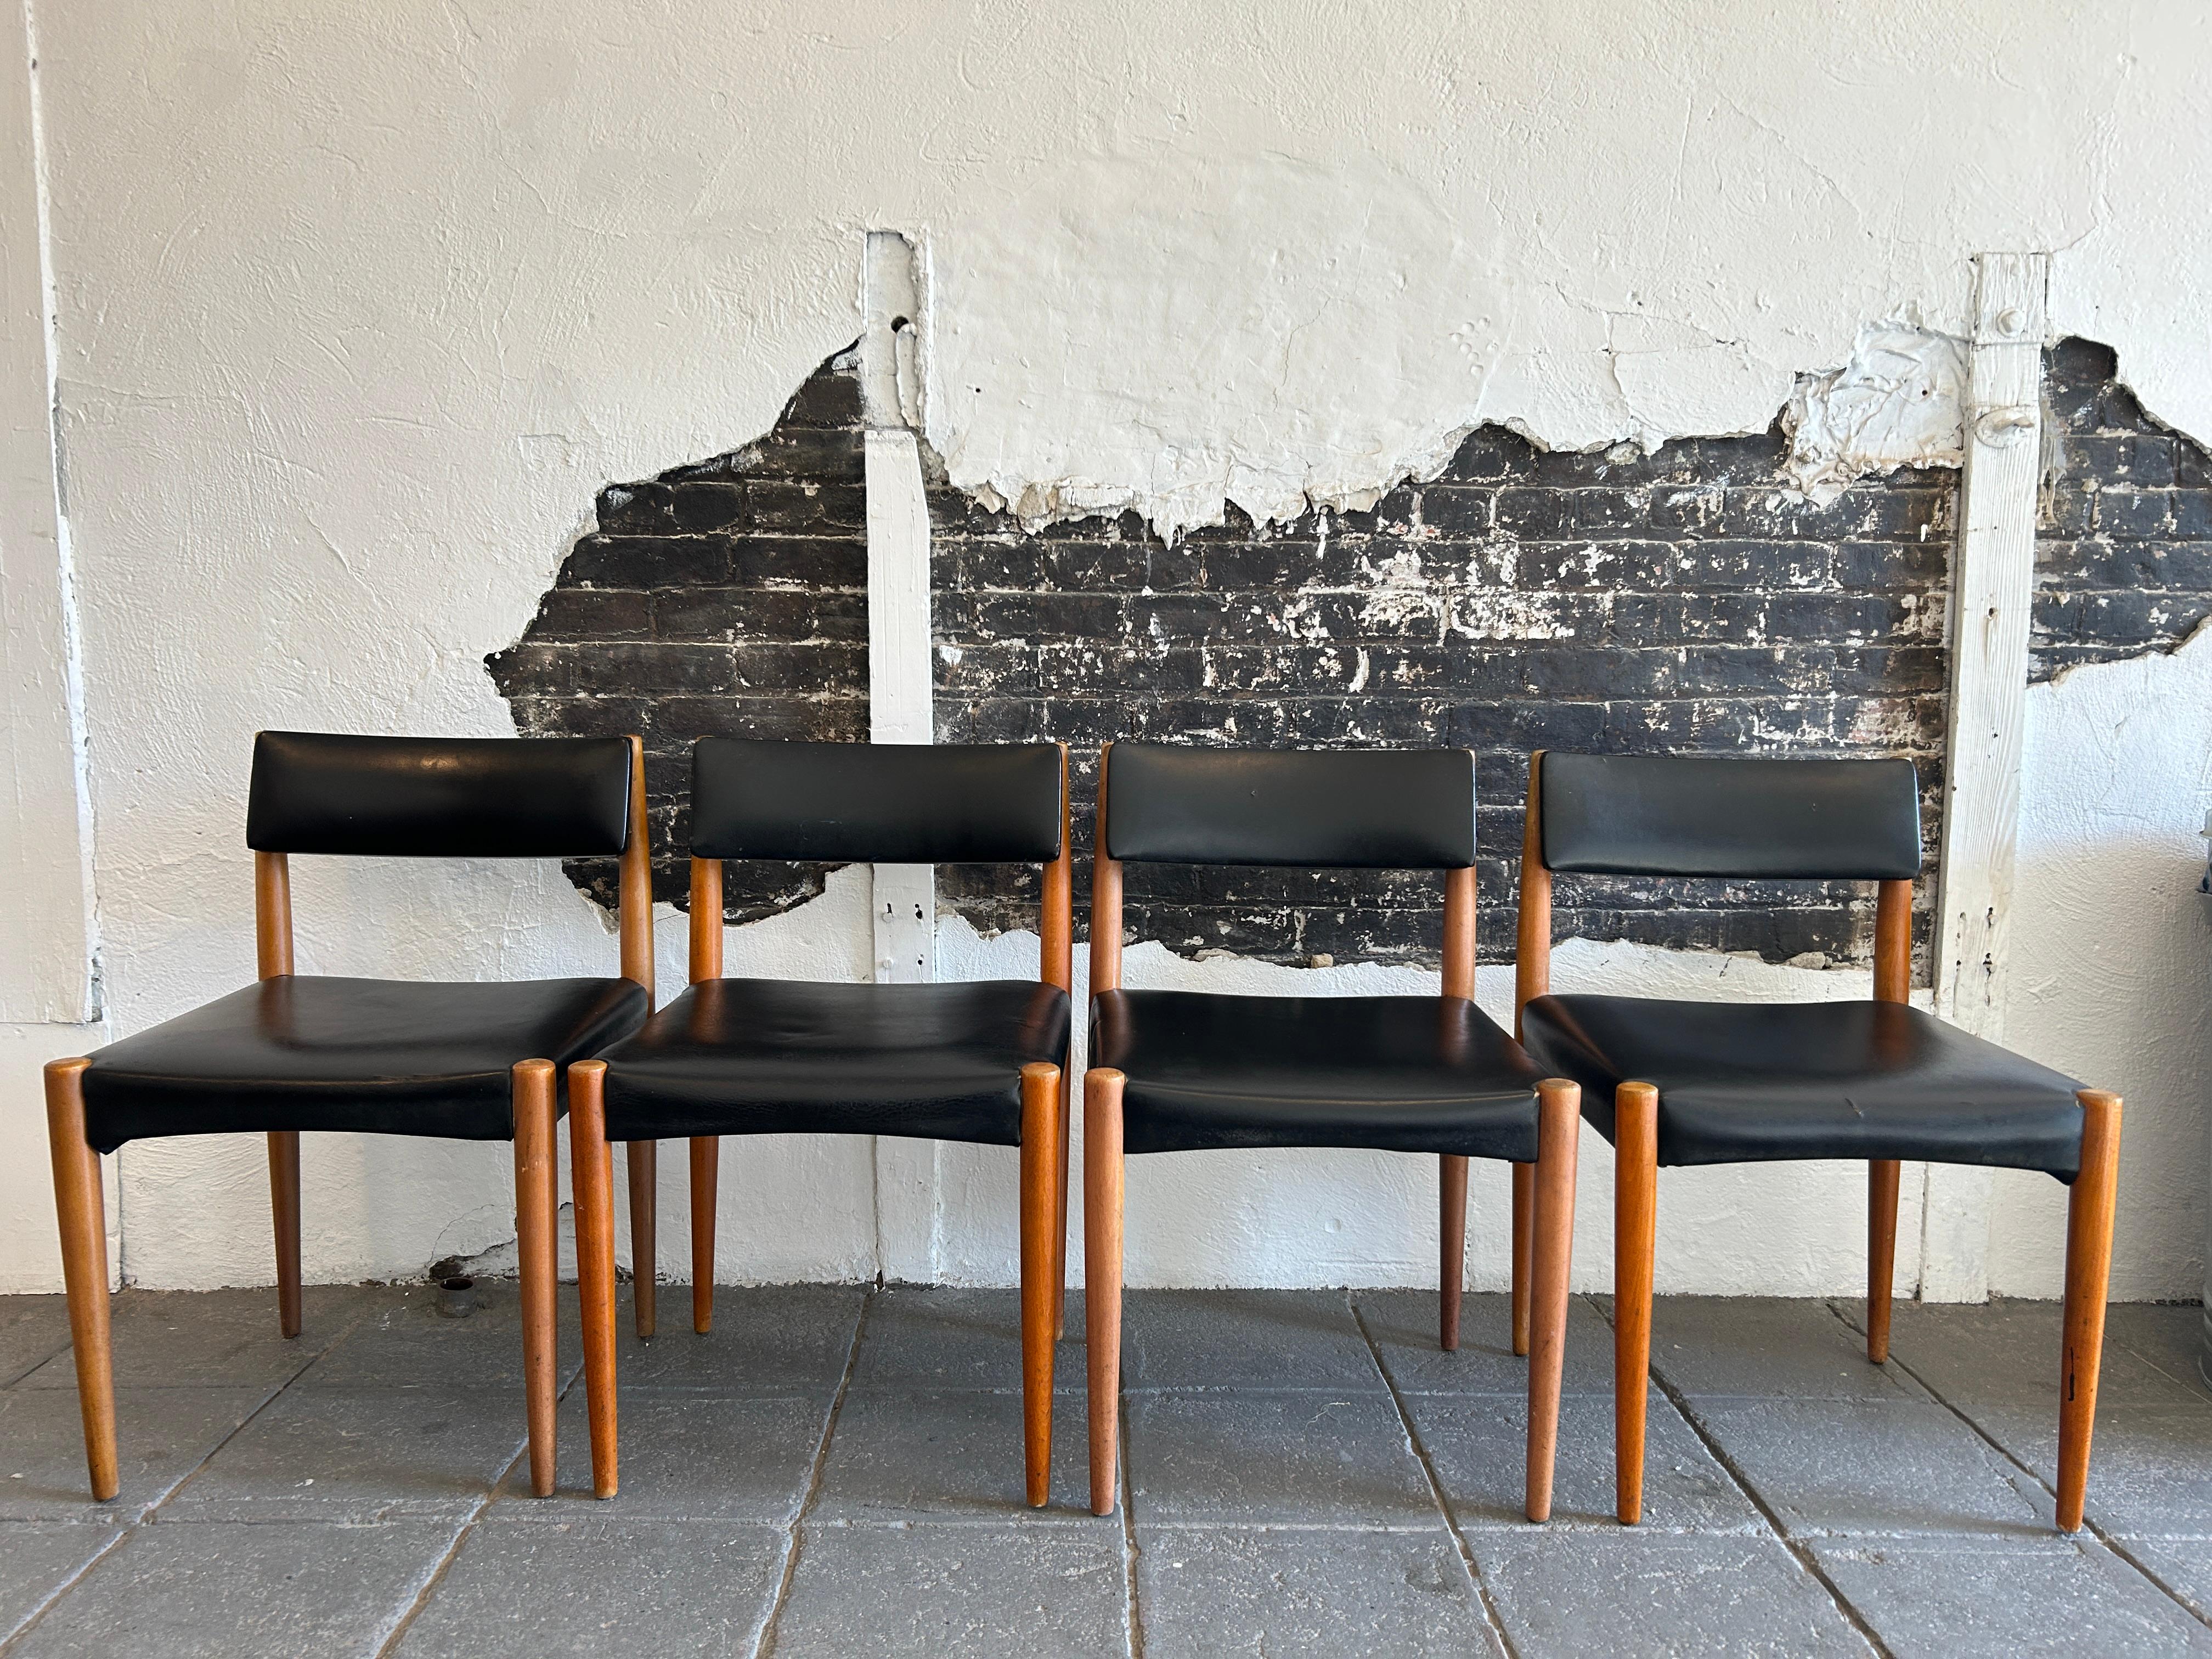 Set of 4 mid century danish modern dining chairs. Simple design with slanted back support. 4 tapered birch legs with black vinyl cushions. Use as is or have them reupholstered. Great design. Circa 1960 made in Denmark. Located in Brooklyn